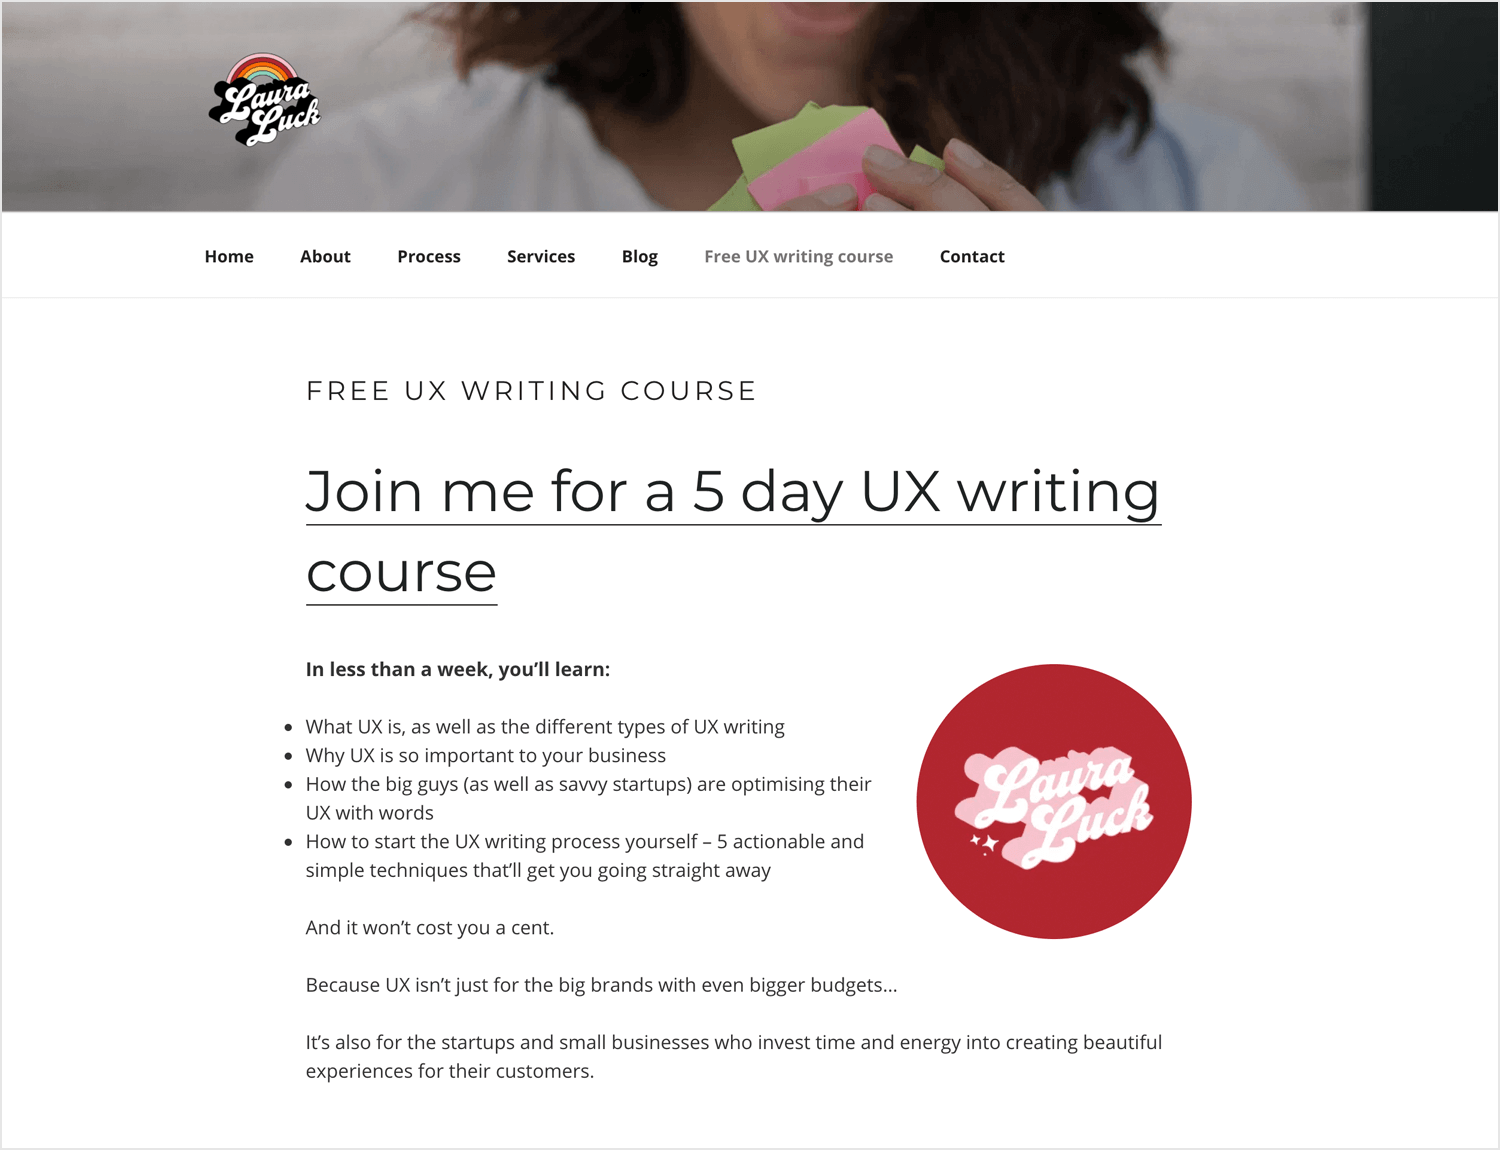 Free UX Writing Course by Laura Luck